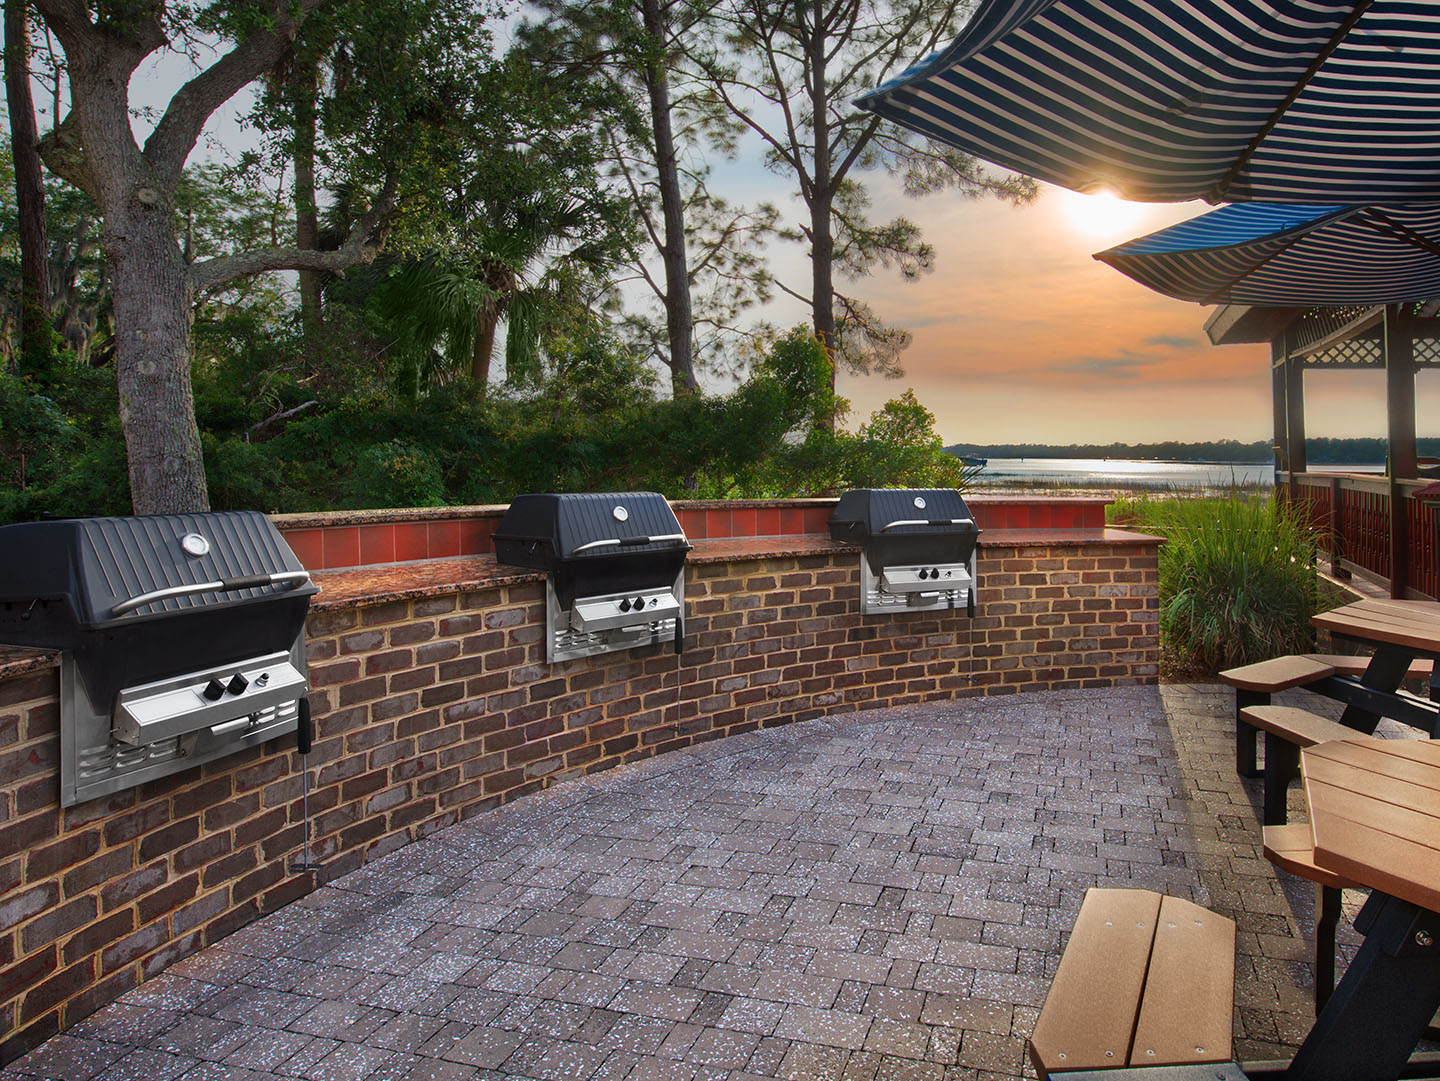 Marriott's Harbour Point Grills. Marriott's Harbour Point is located in Hilton Head Island, South Carolina United States.